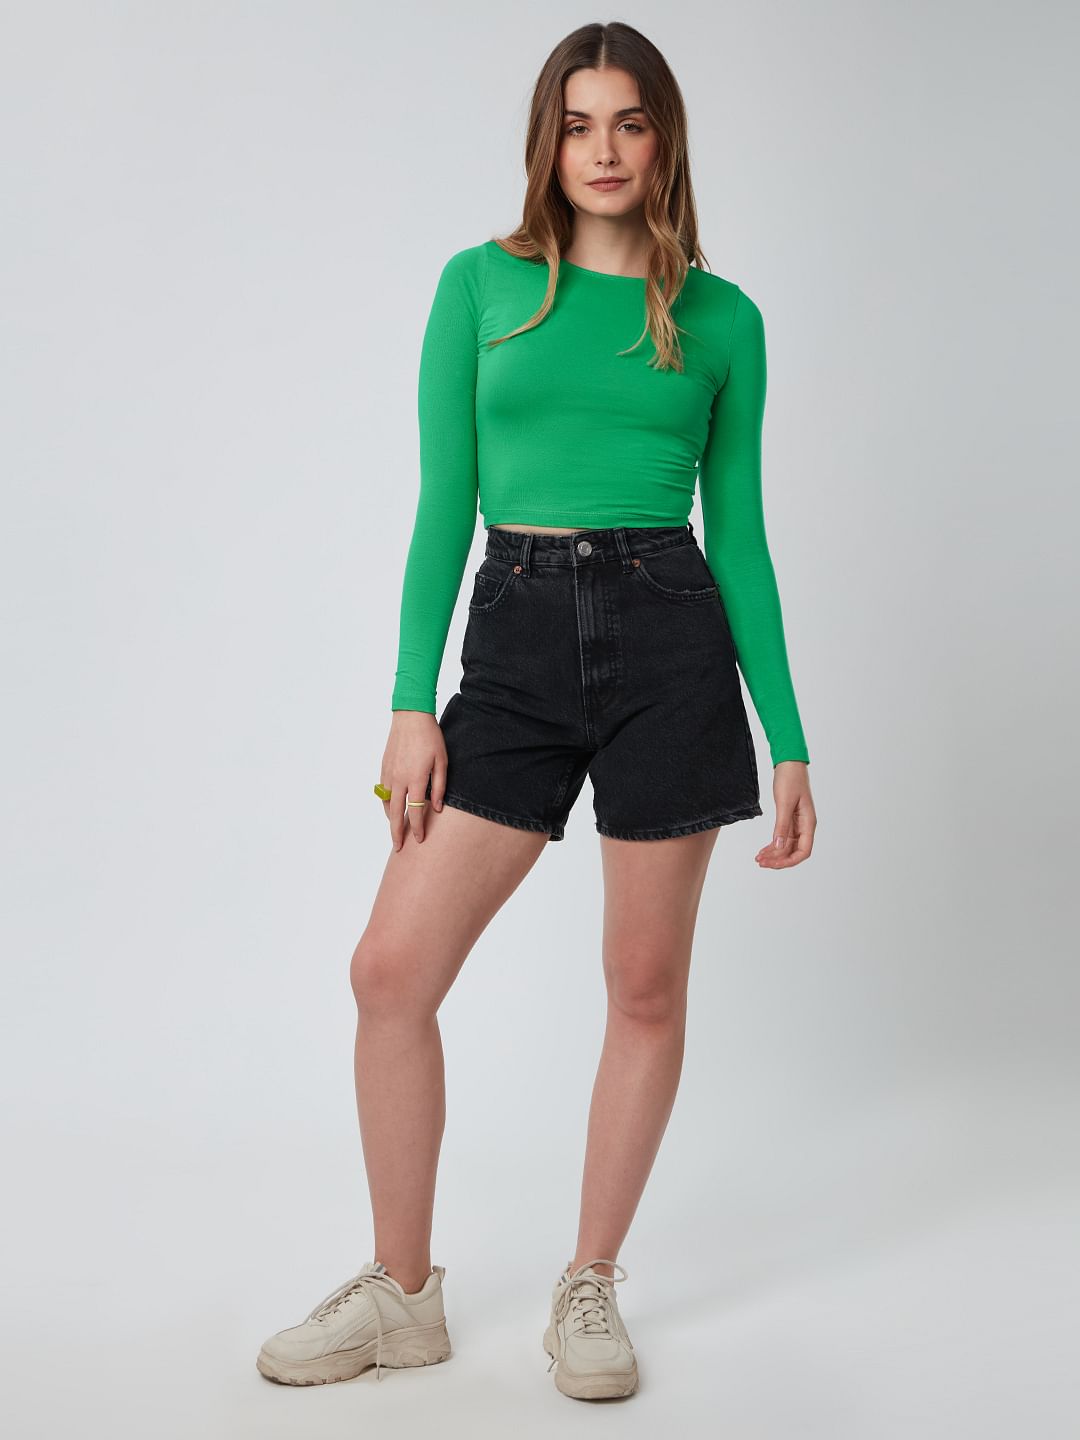 Solids: Green (Cropped Fit)